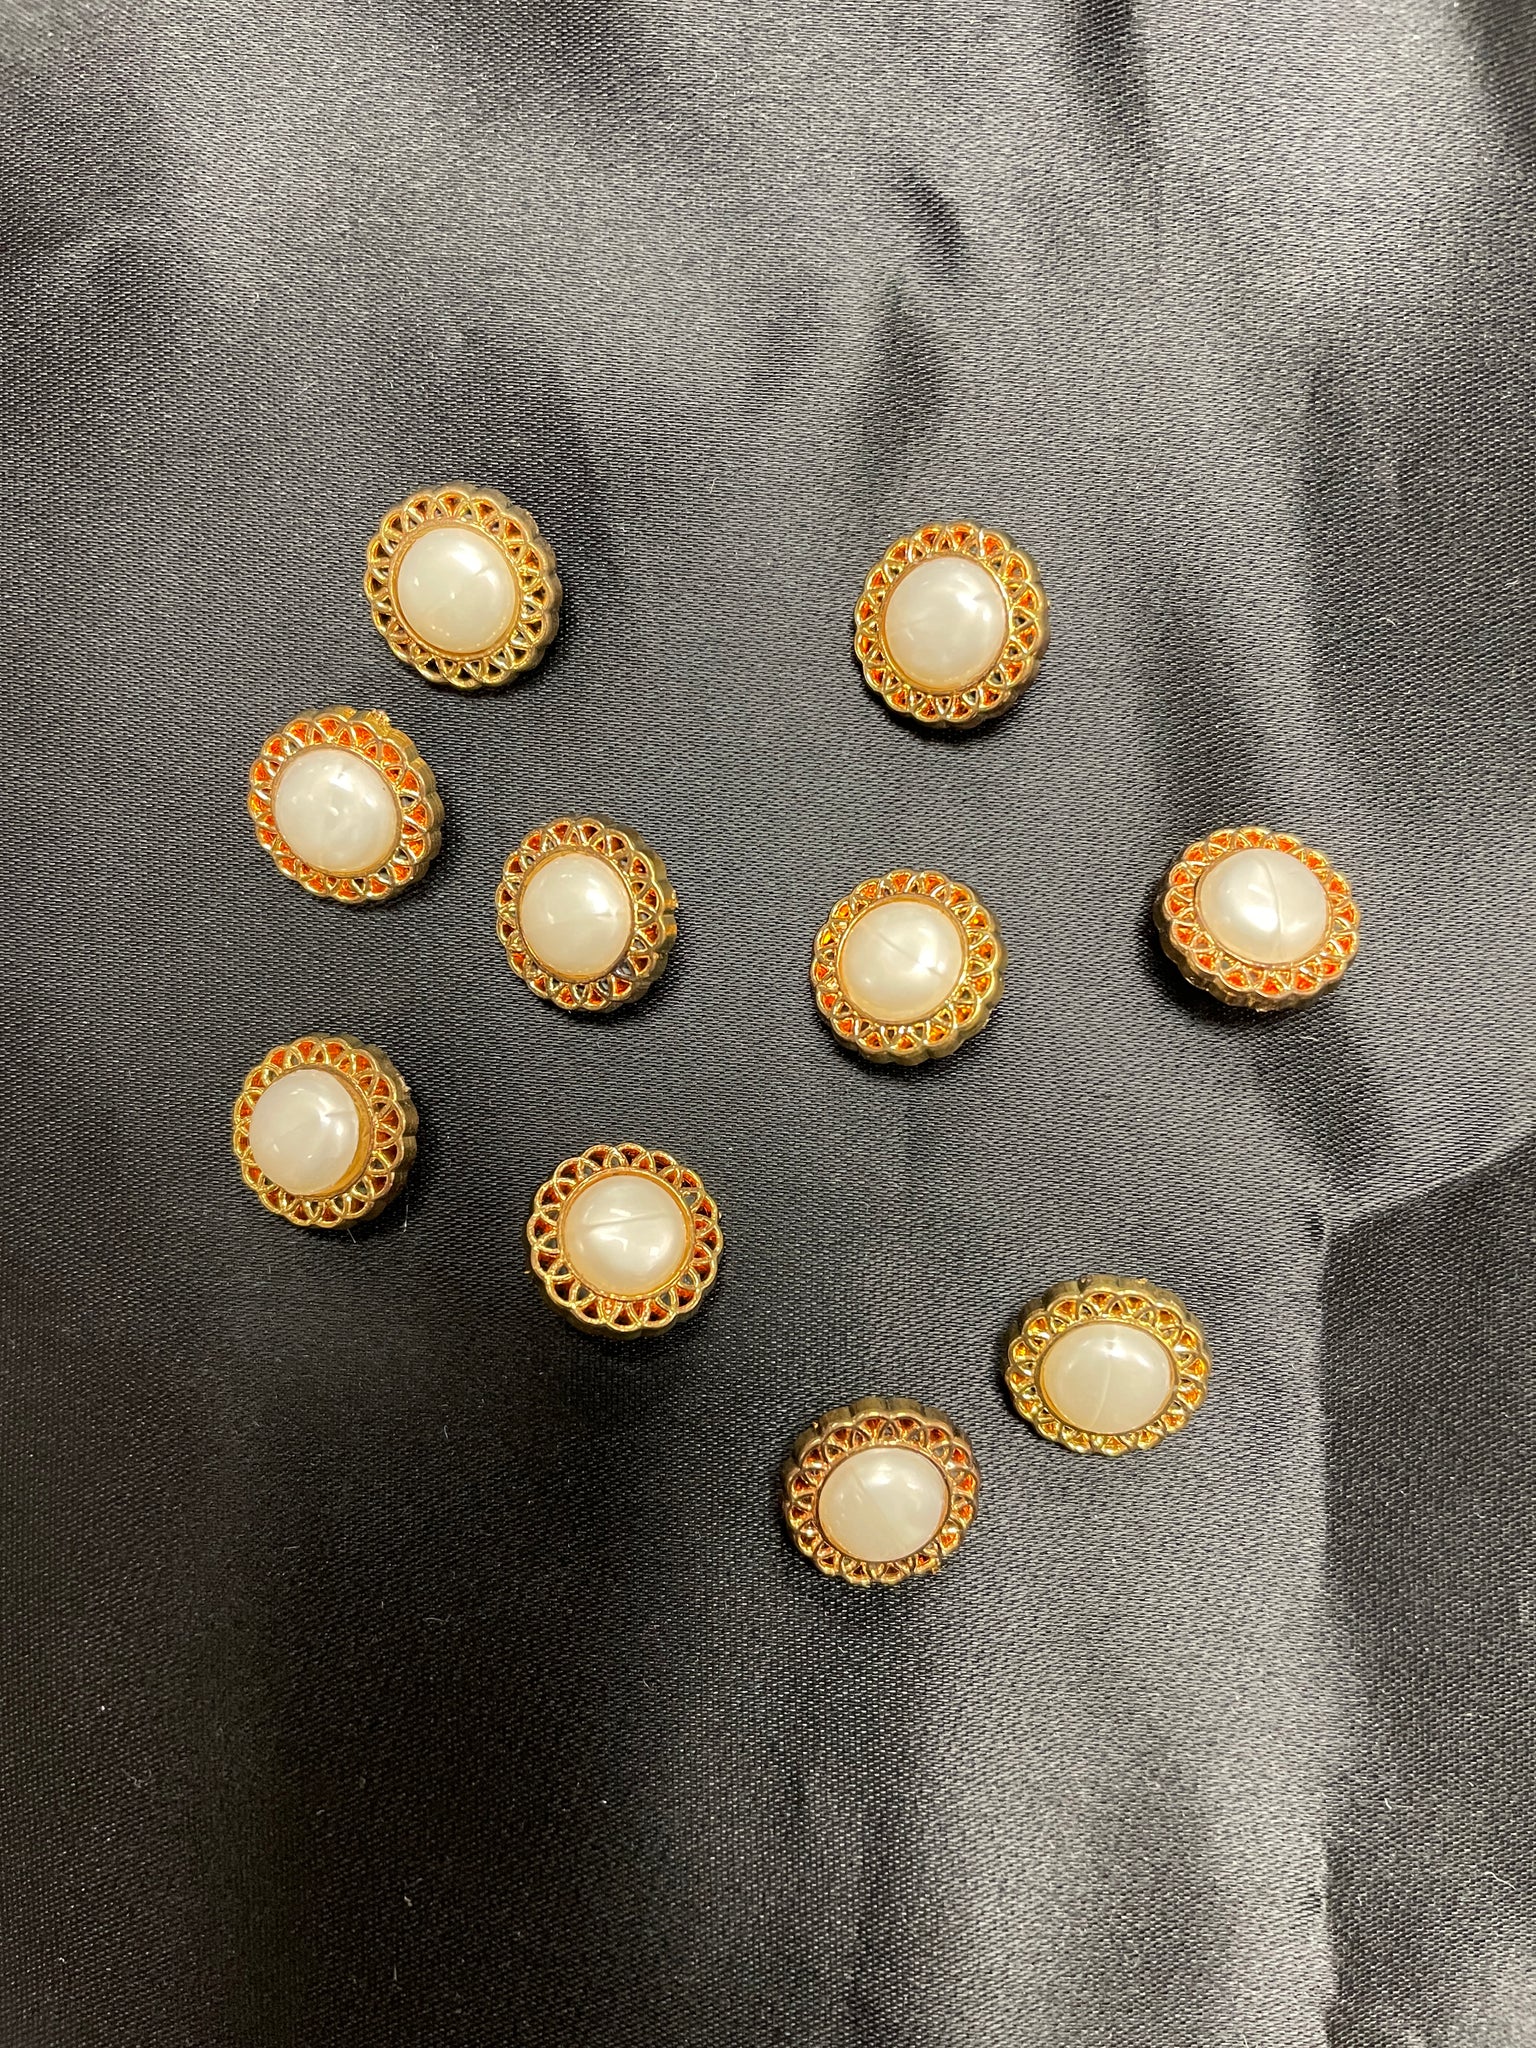 Buttons Set of 10 Plastic - Gold with Faux Pearl Centers